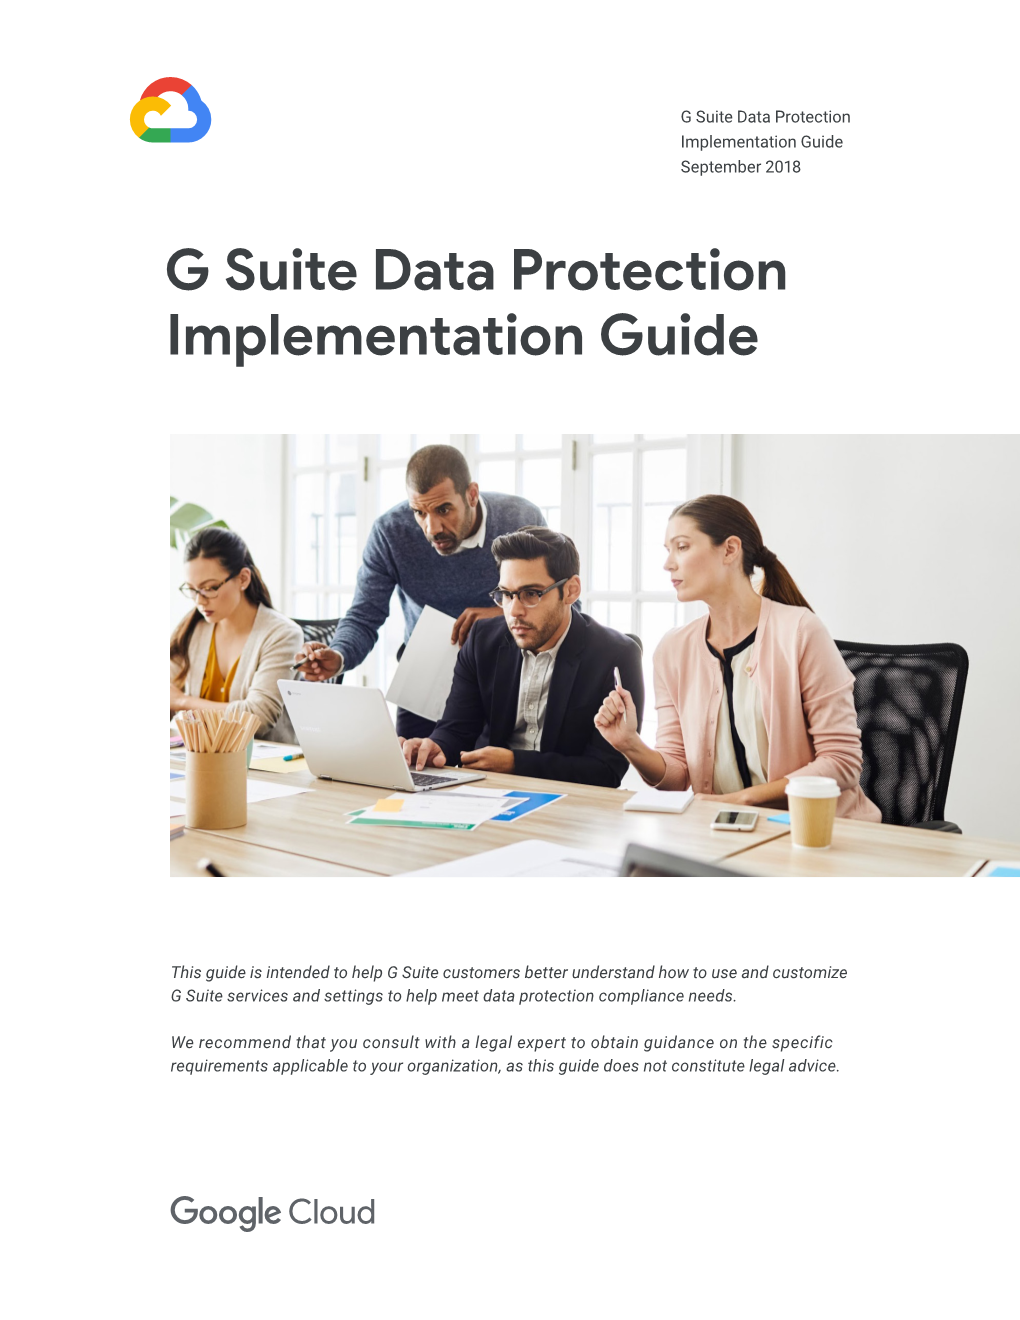 G Suite Data Protection Implementation Guide September 2018